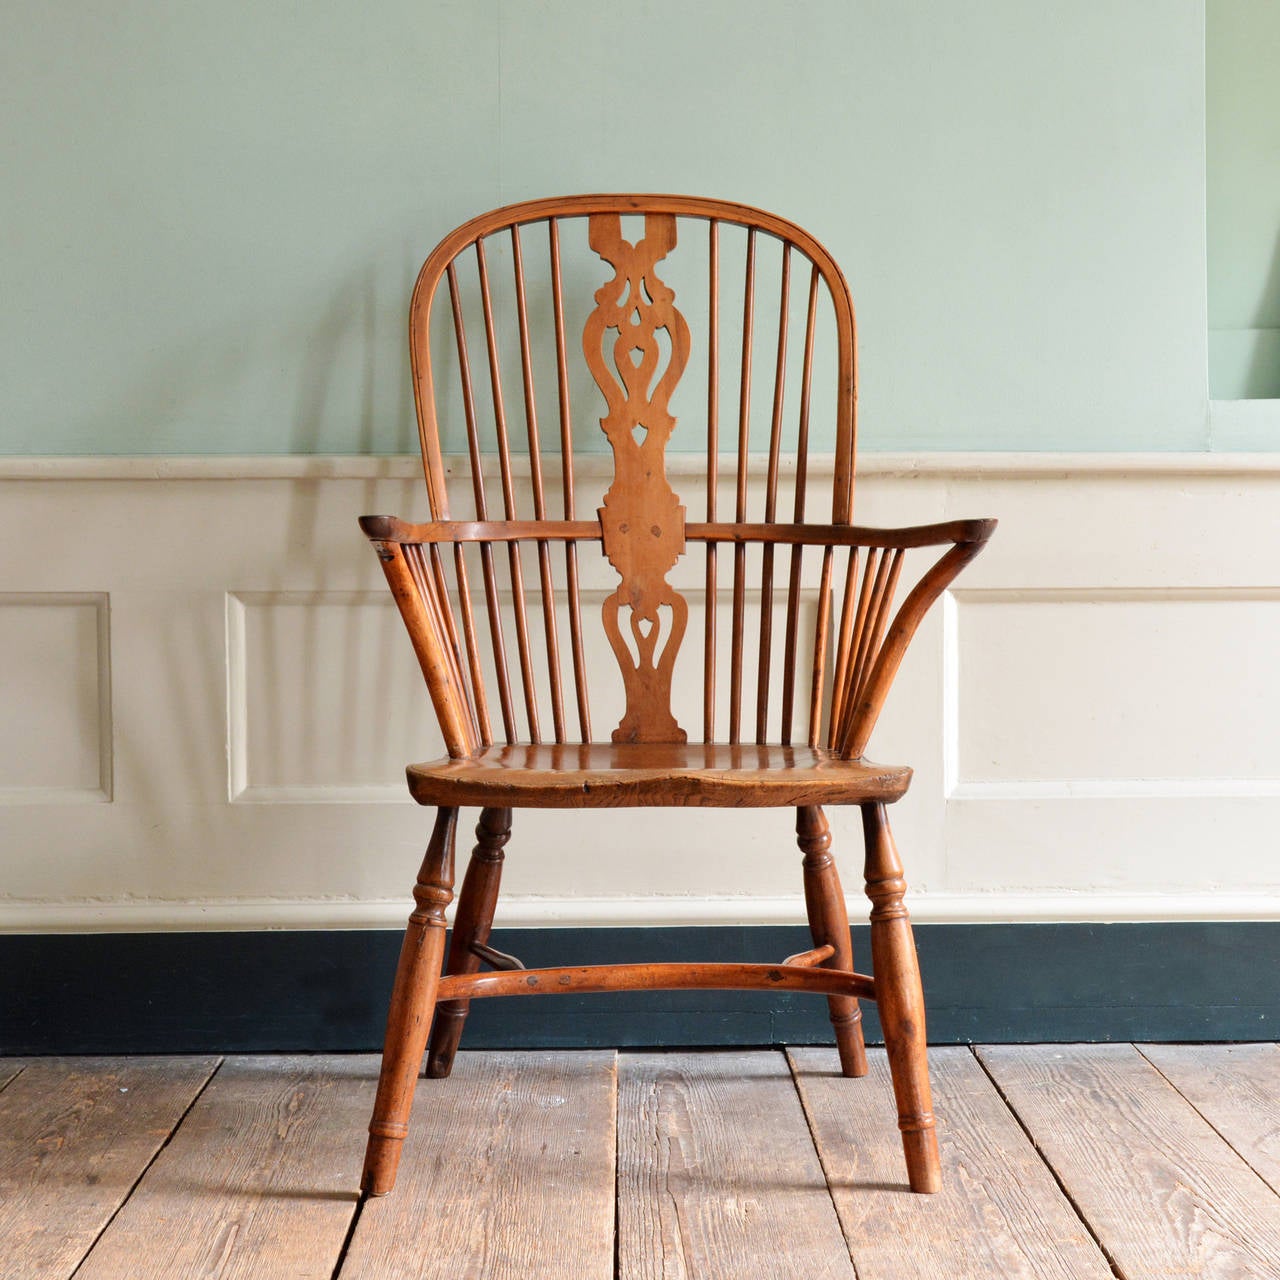 A large nineteenth century Windsor armchair, Thames Valley region circa 1830, yew with elm seat.

Available to view at Brunswick House, London.

Height 112cm, width 69cm, depth 51cm.